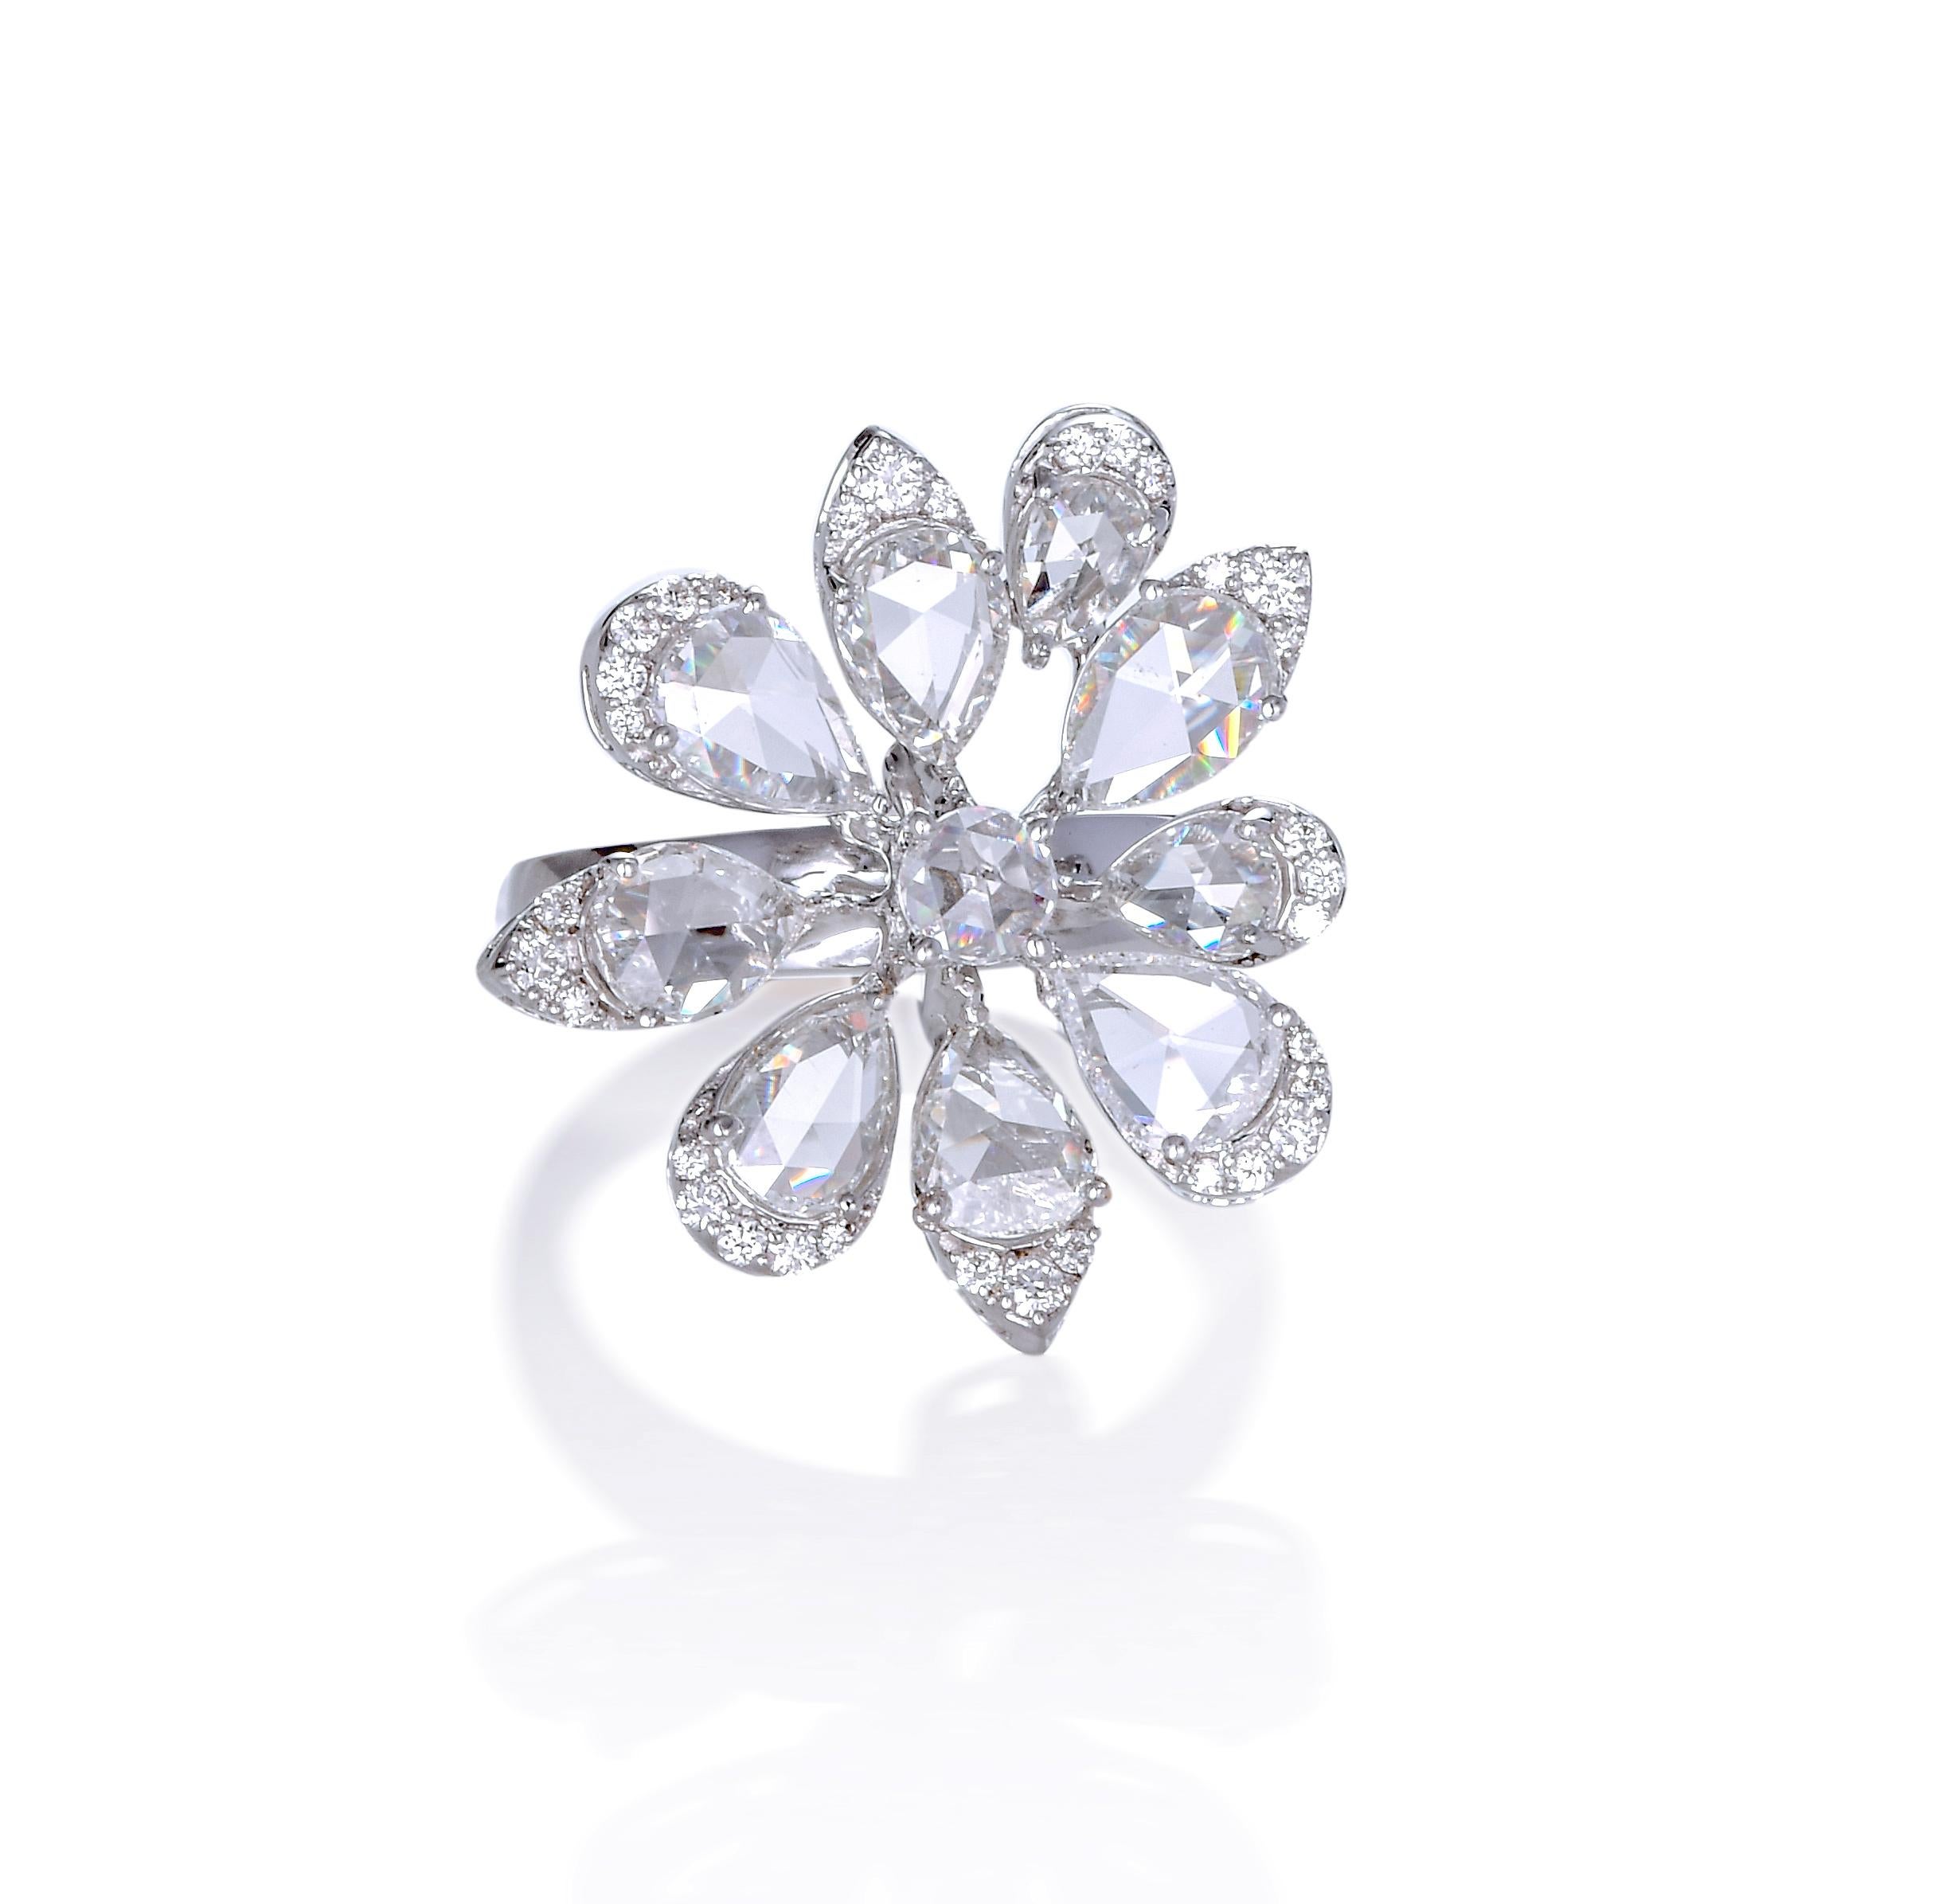 A  ring of clustered petals formed with pear-shaped rose cut diamonds and round diamonds in 18k white gold.